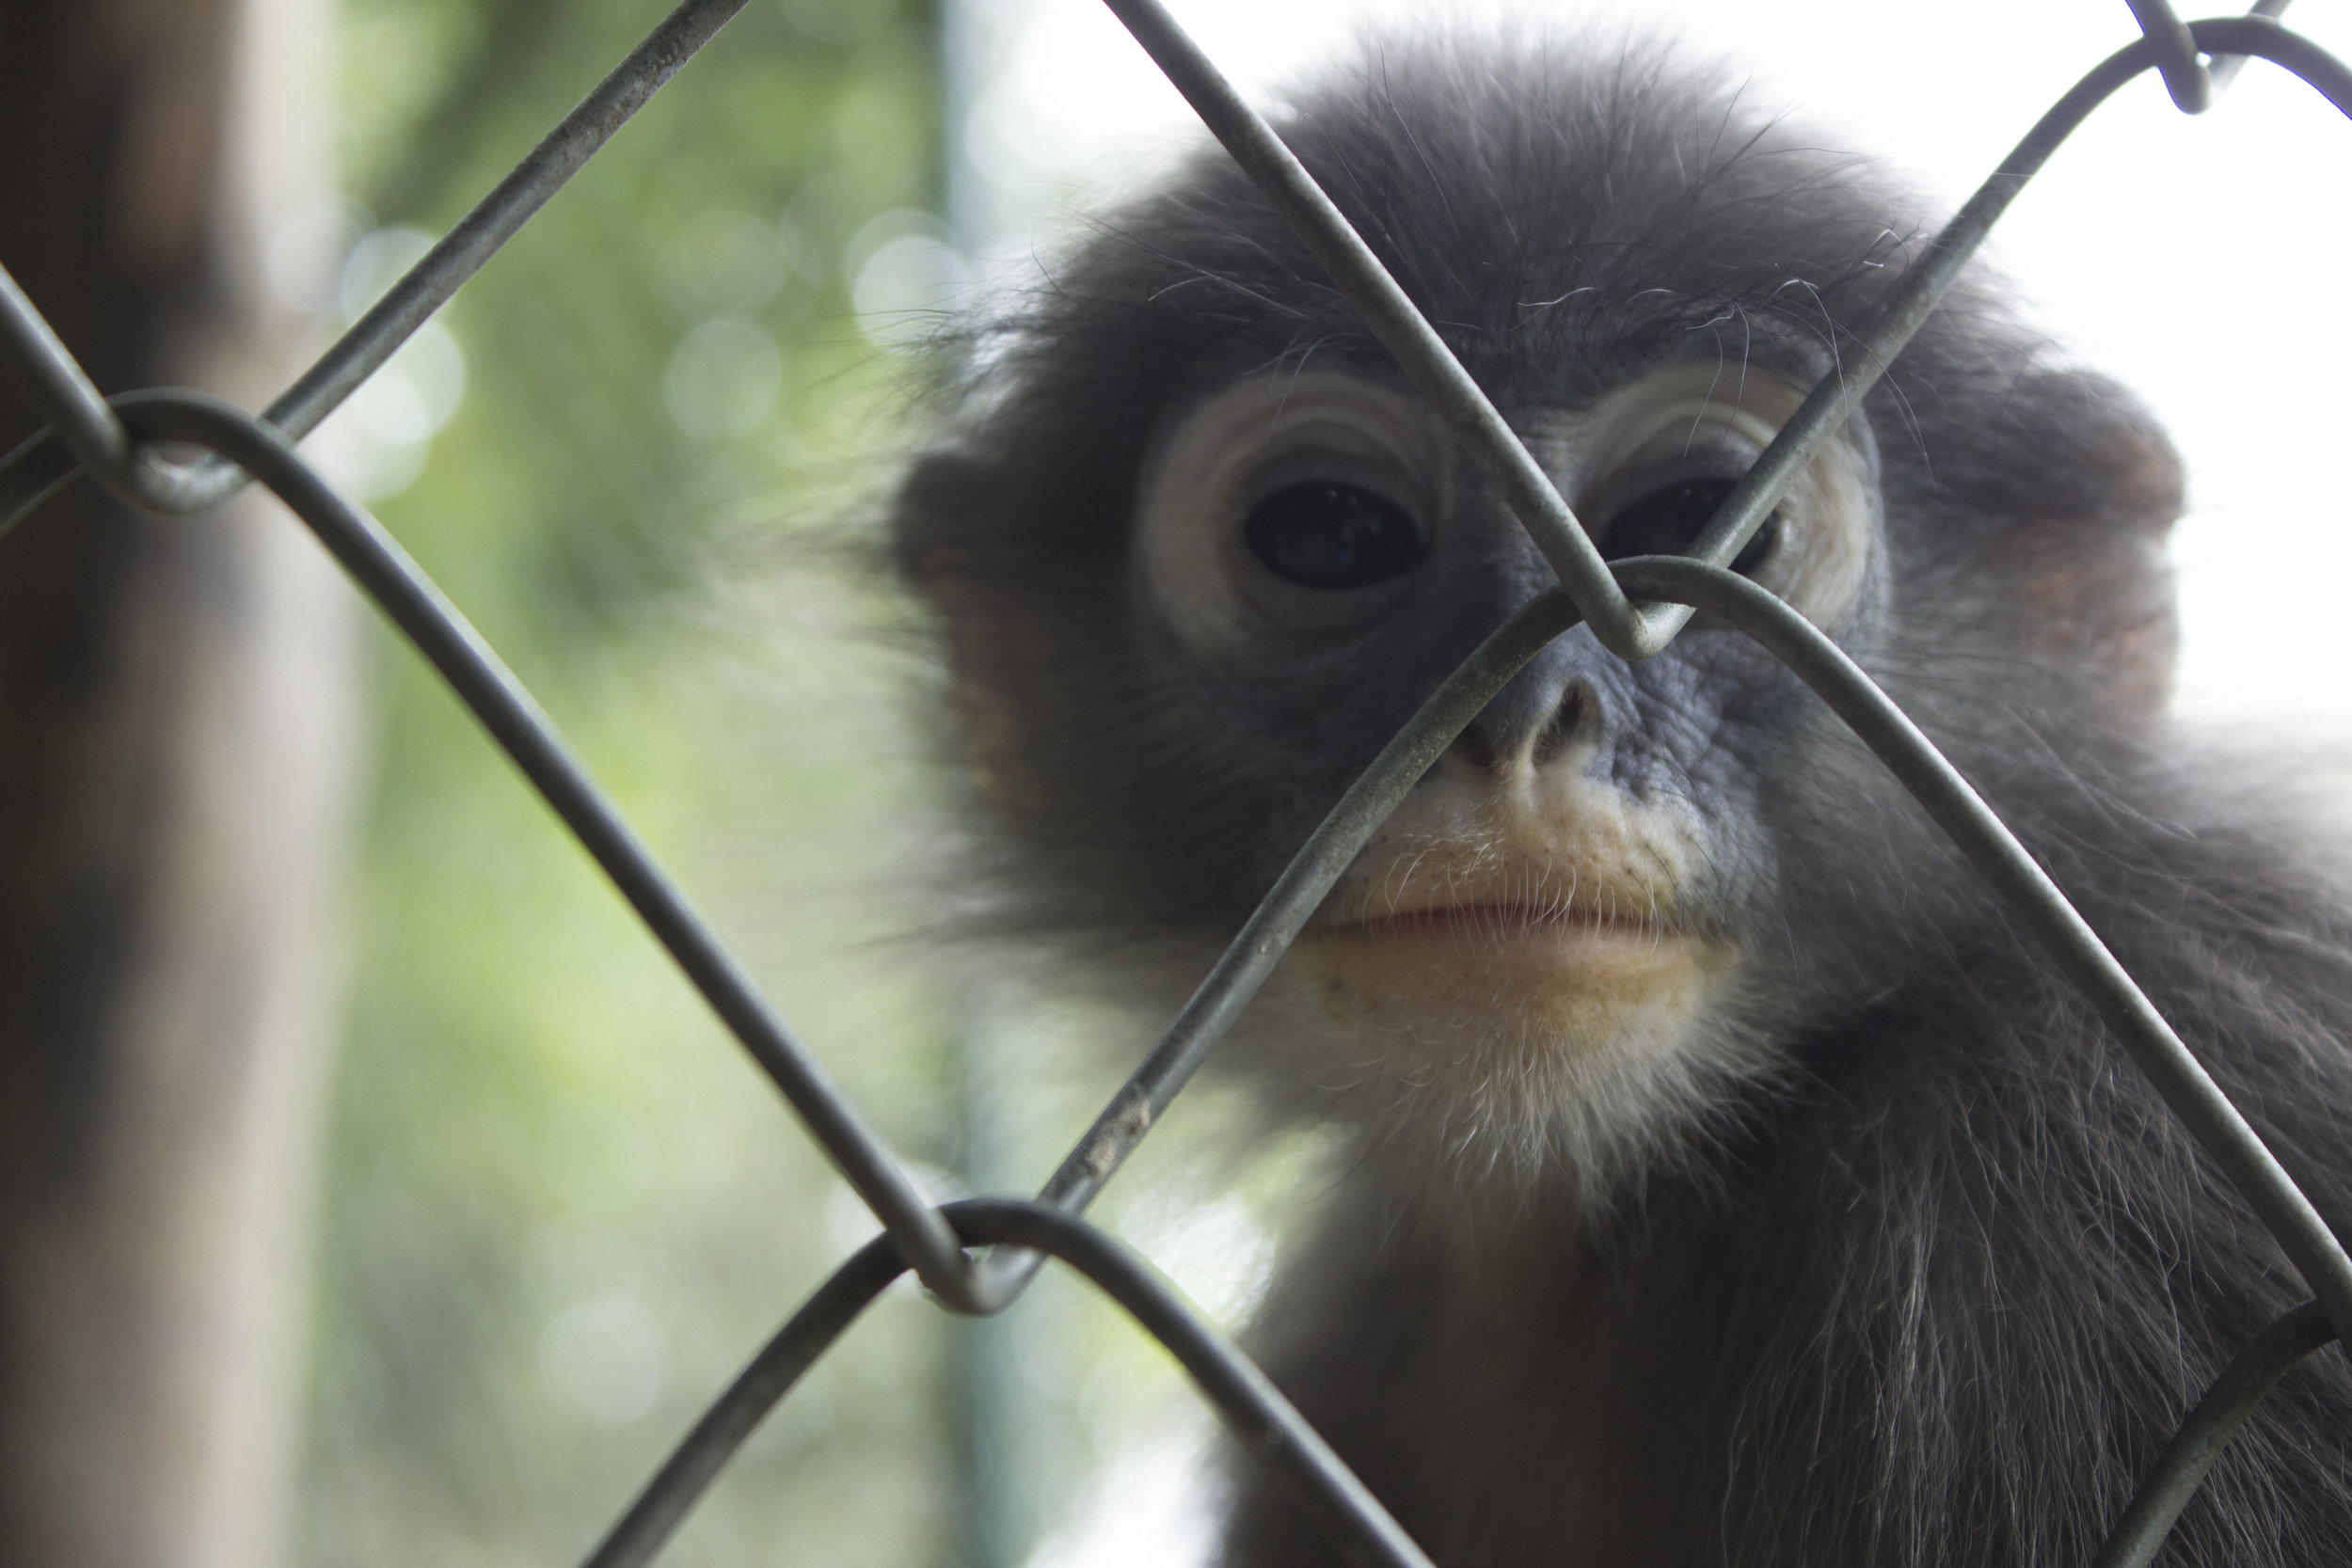  Baby langur monkeys required additional enrichments, like sunflower seeds stuck into corn cobs, to stimulate their growing minds. 